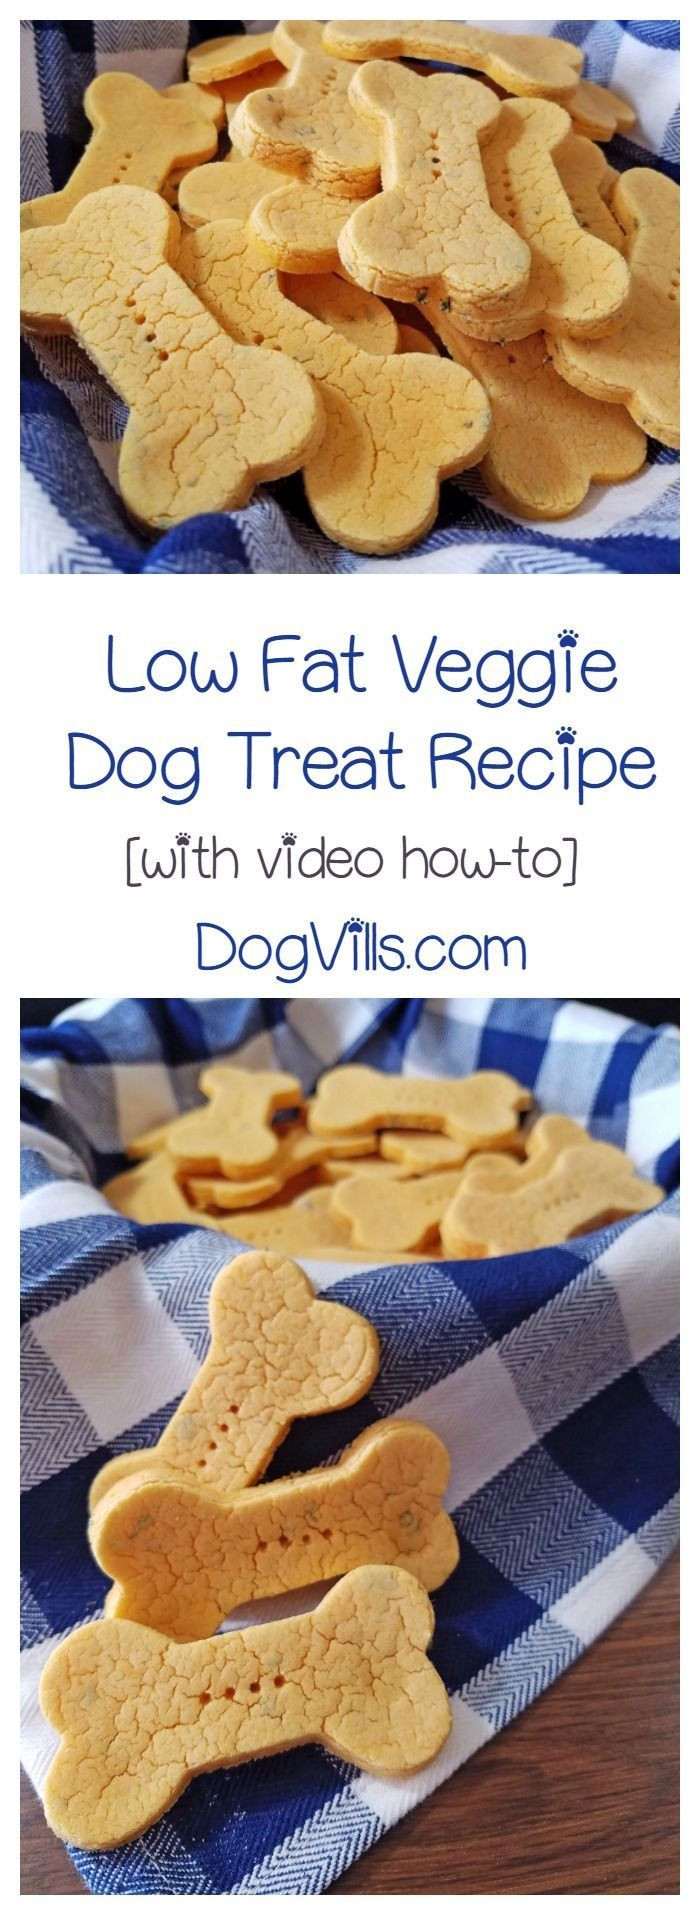 Low Fat Dog Treat Recipes
 Dogs [with video tutorial] Recipe